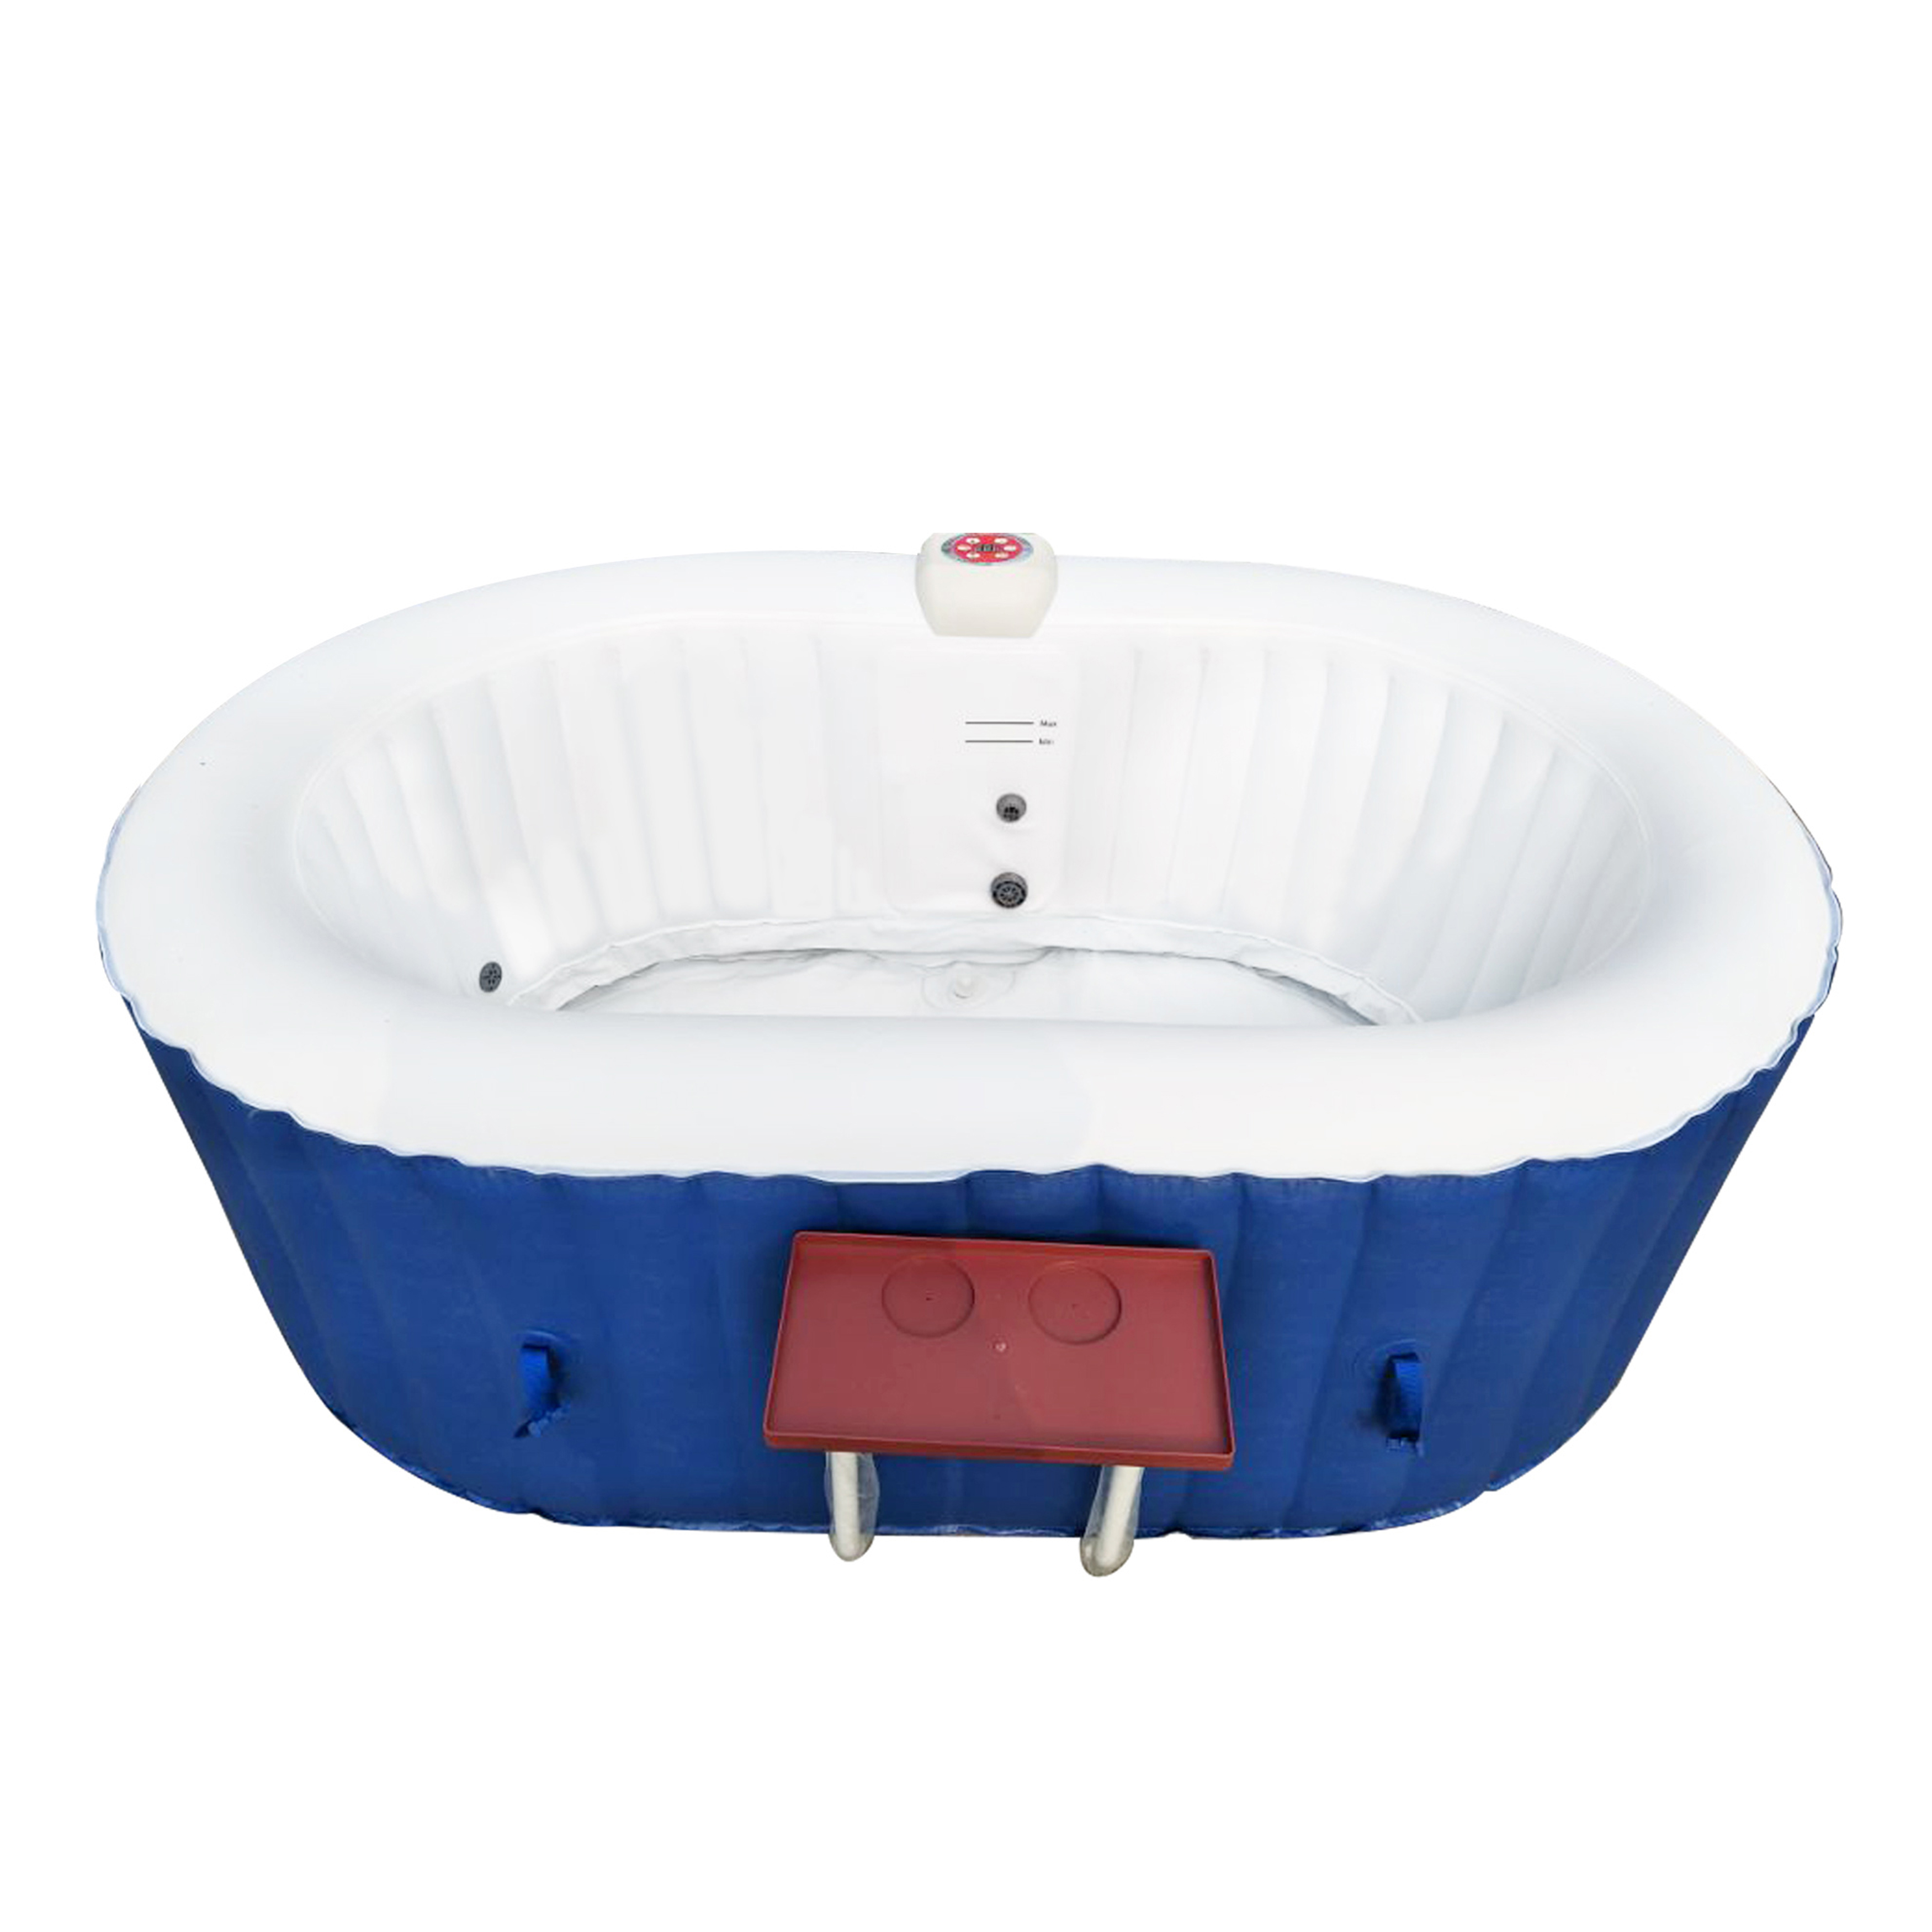 ALEKO Oval Inflatable Dark Blue 2 Person Hot Tub Spa with Drink Tray and Cover - image 2 of 14